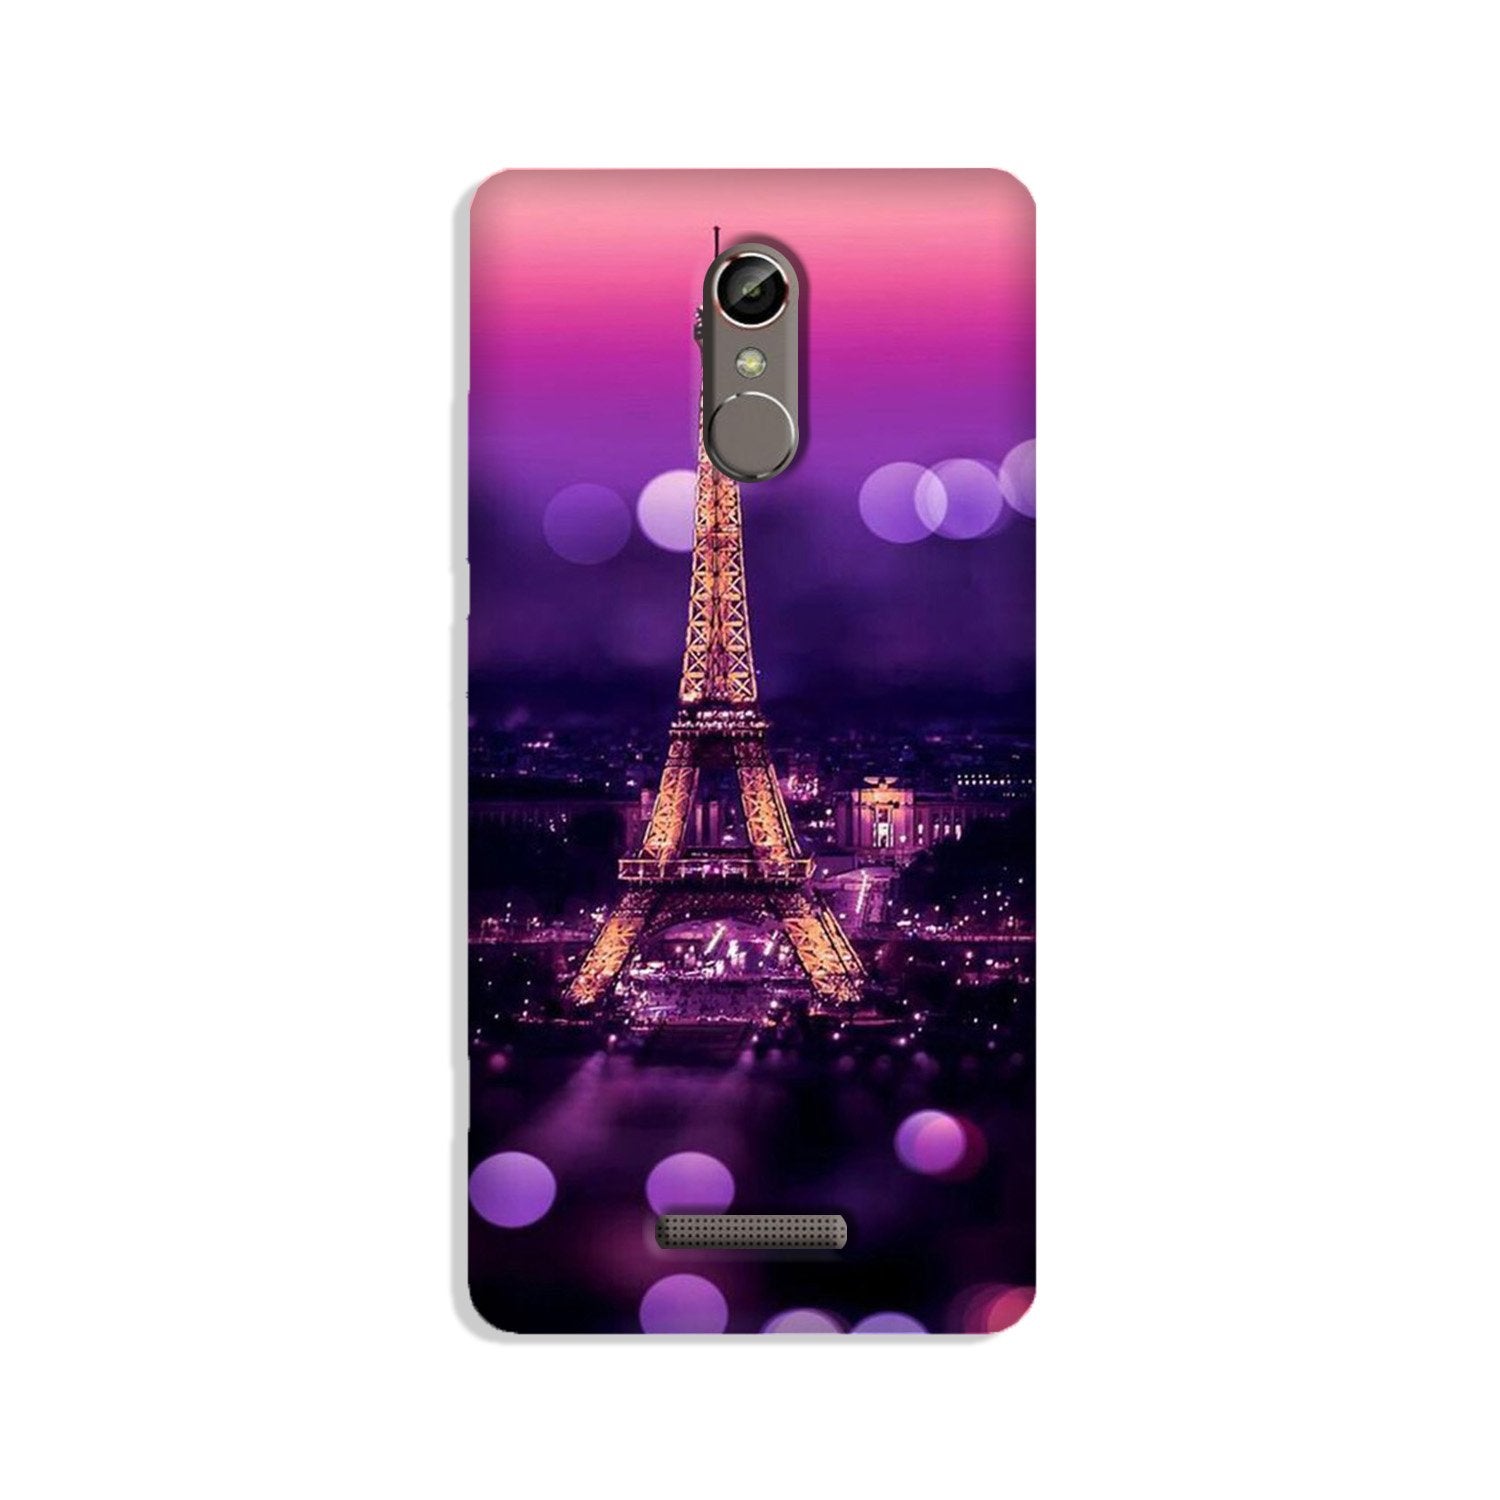 Eiffel Tower Case for Gionee S6s